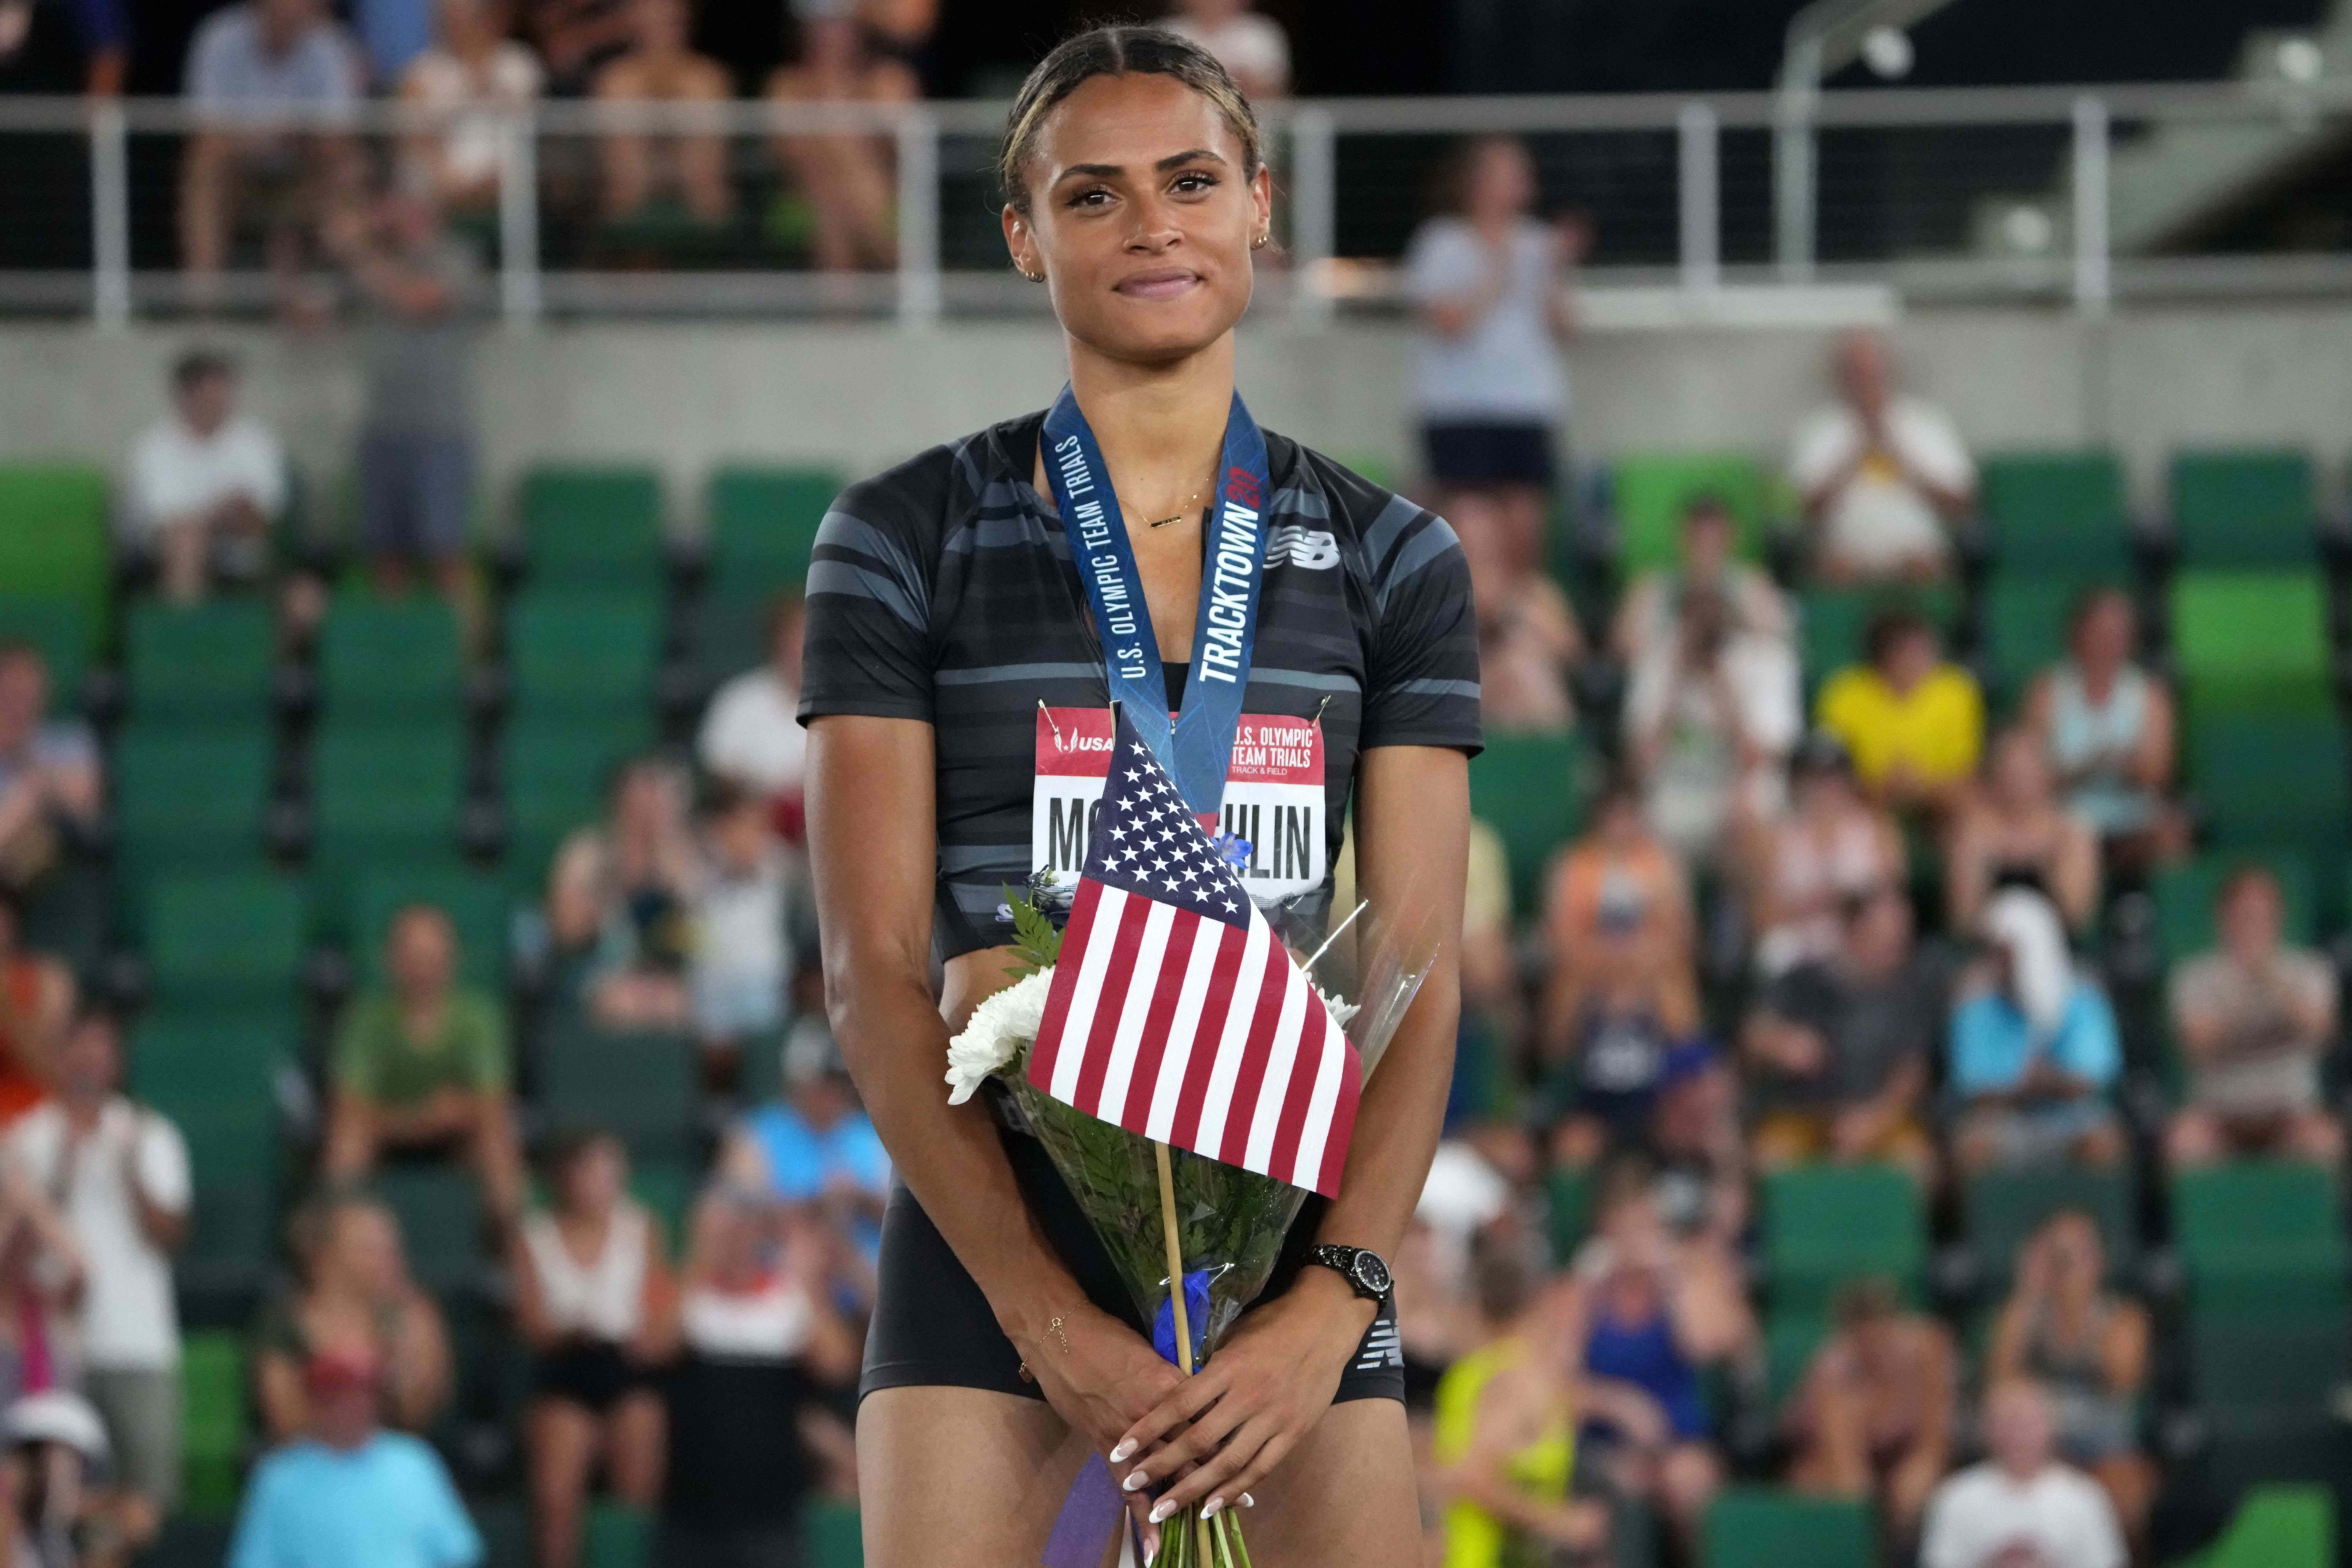 Jun 27, 2021; Eugene, OR, USA; Sydney McLaughlin poses with gold medal after winning the women's 400m hurdles in a world-record 51.90 during the US Olympic Team Trials at Hayward Field. Mandatory Credit: Kirby Lee-USA TODAY Sports